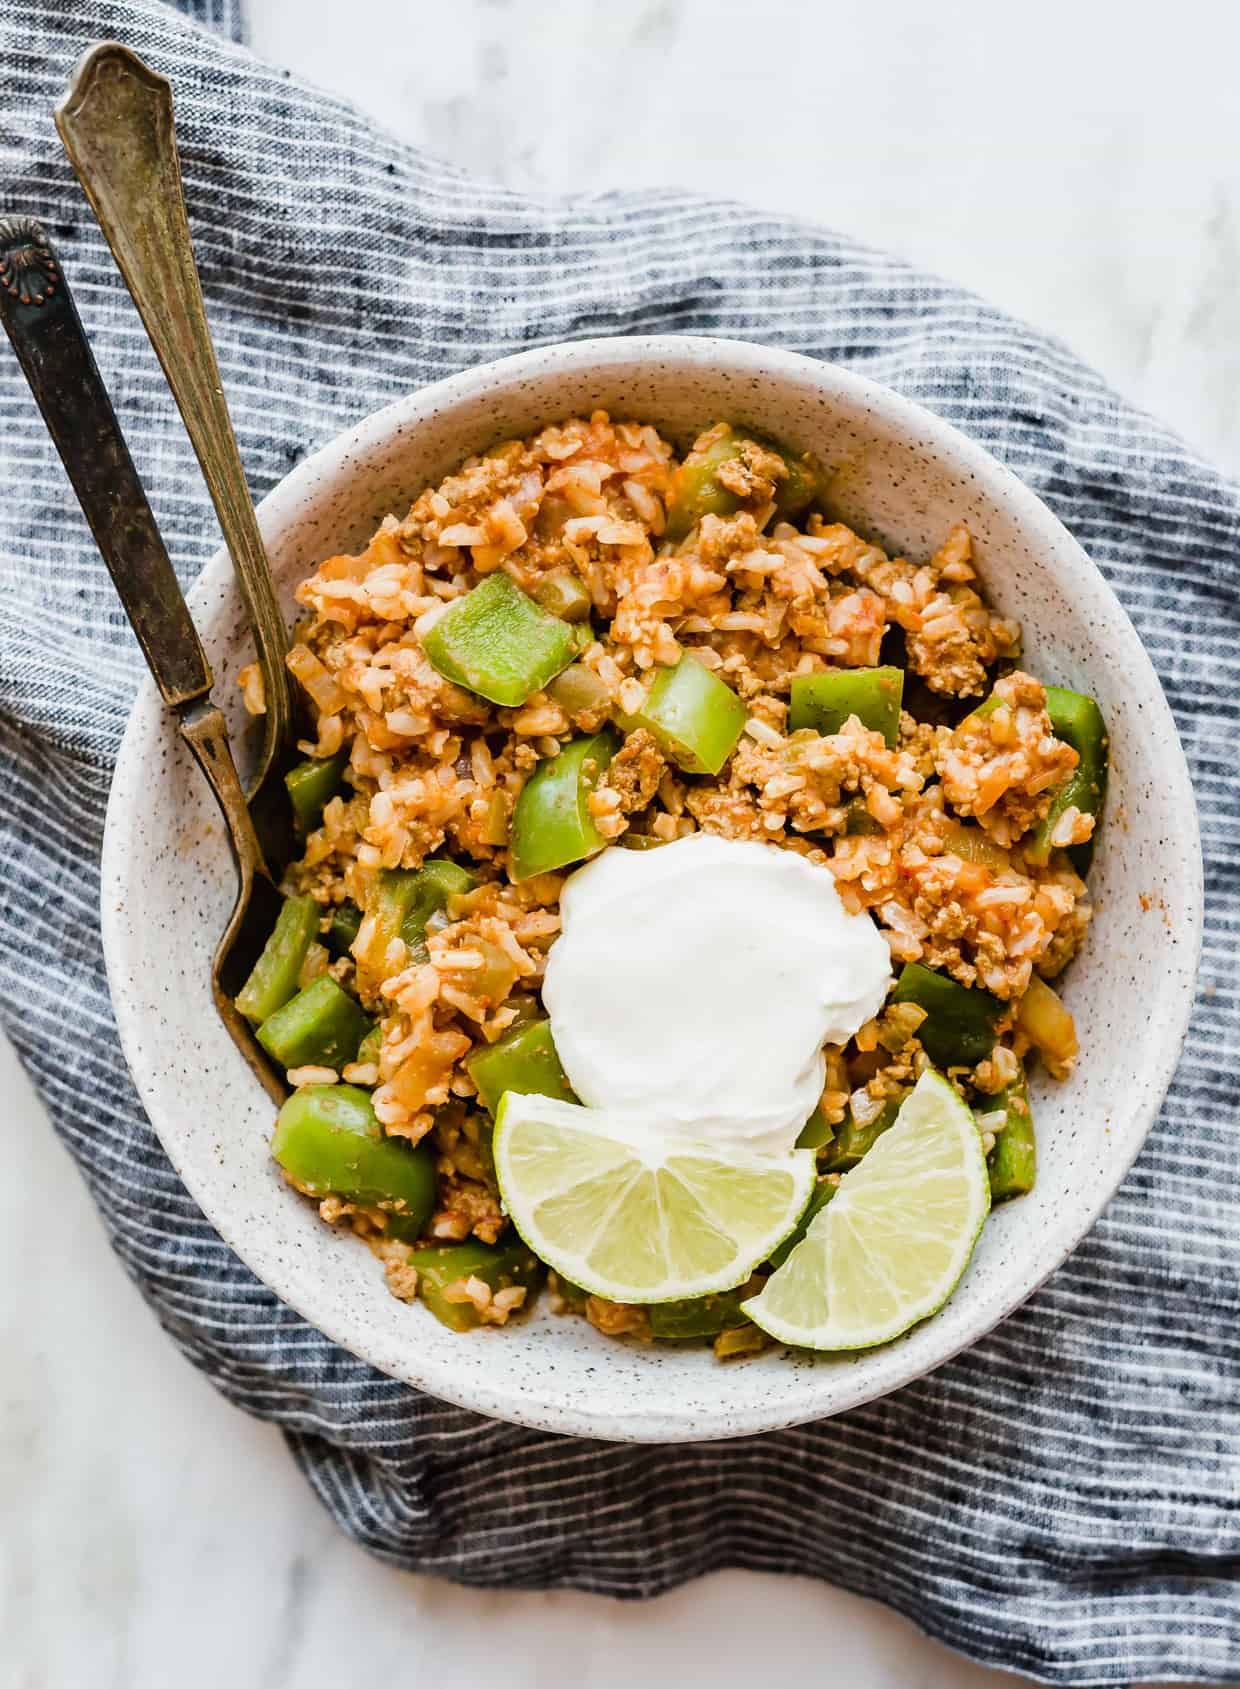 This Reverse Stuffed Peppers and Brown Rice Bowl will become your new go-to meal! It's super healthy, easy to make, and doesn't require any special ingredients!